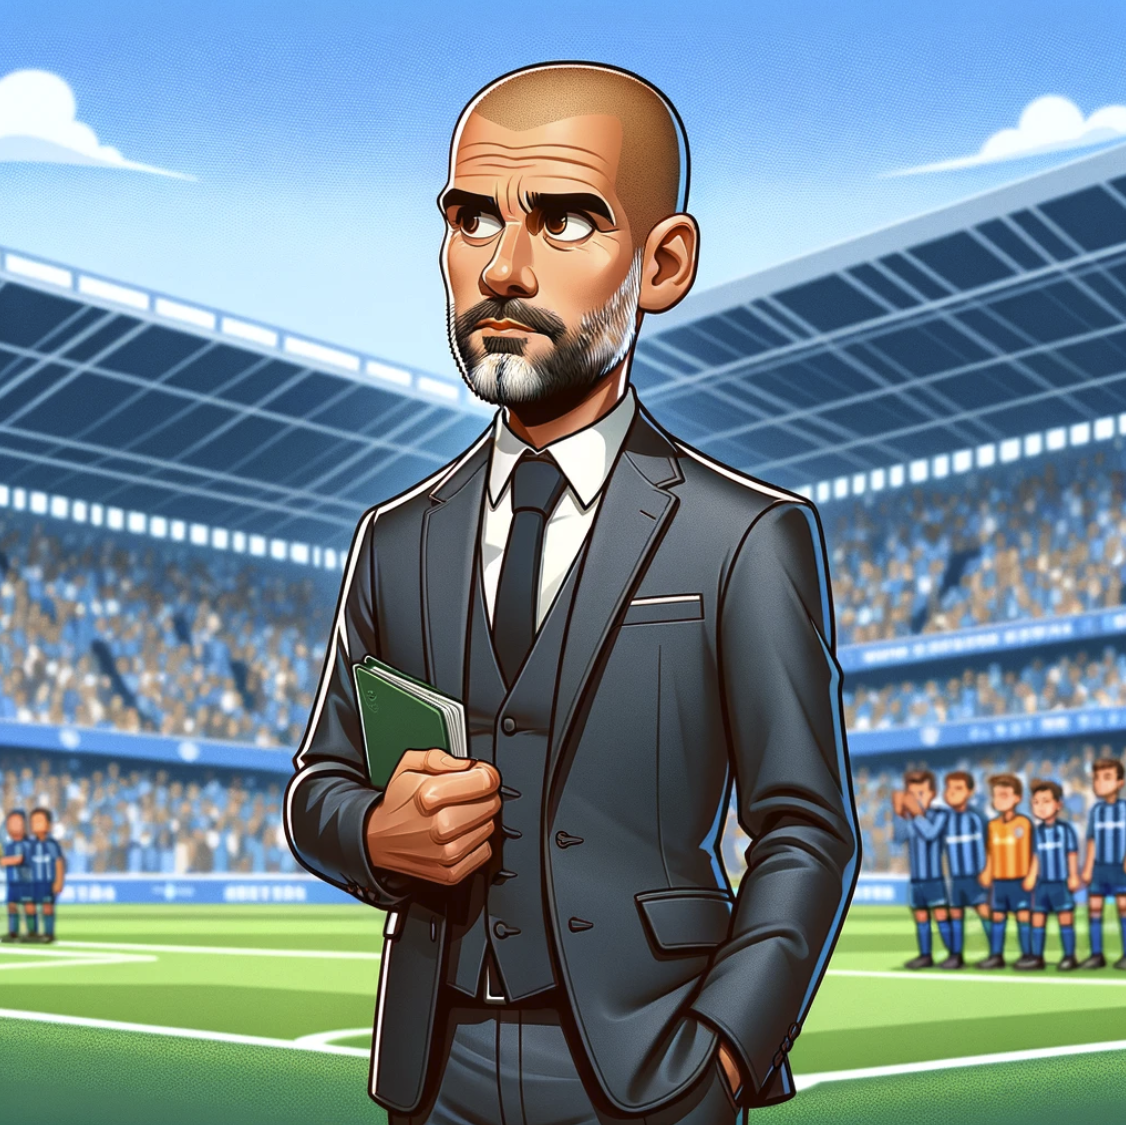 image inspired by a famous football manager, reminiscent of Pep Guardiola's style